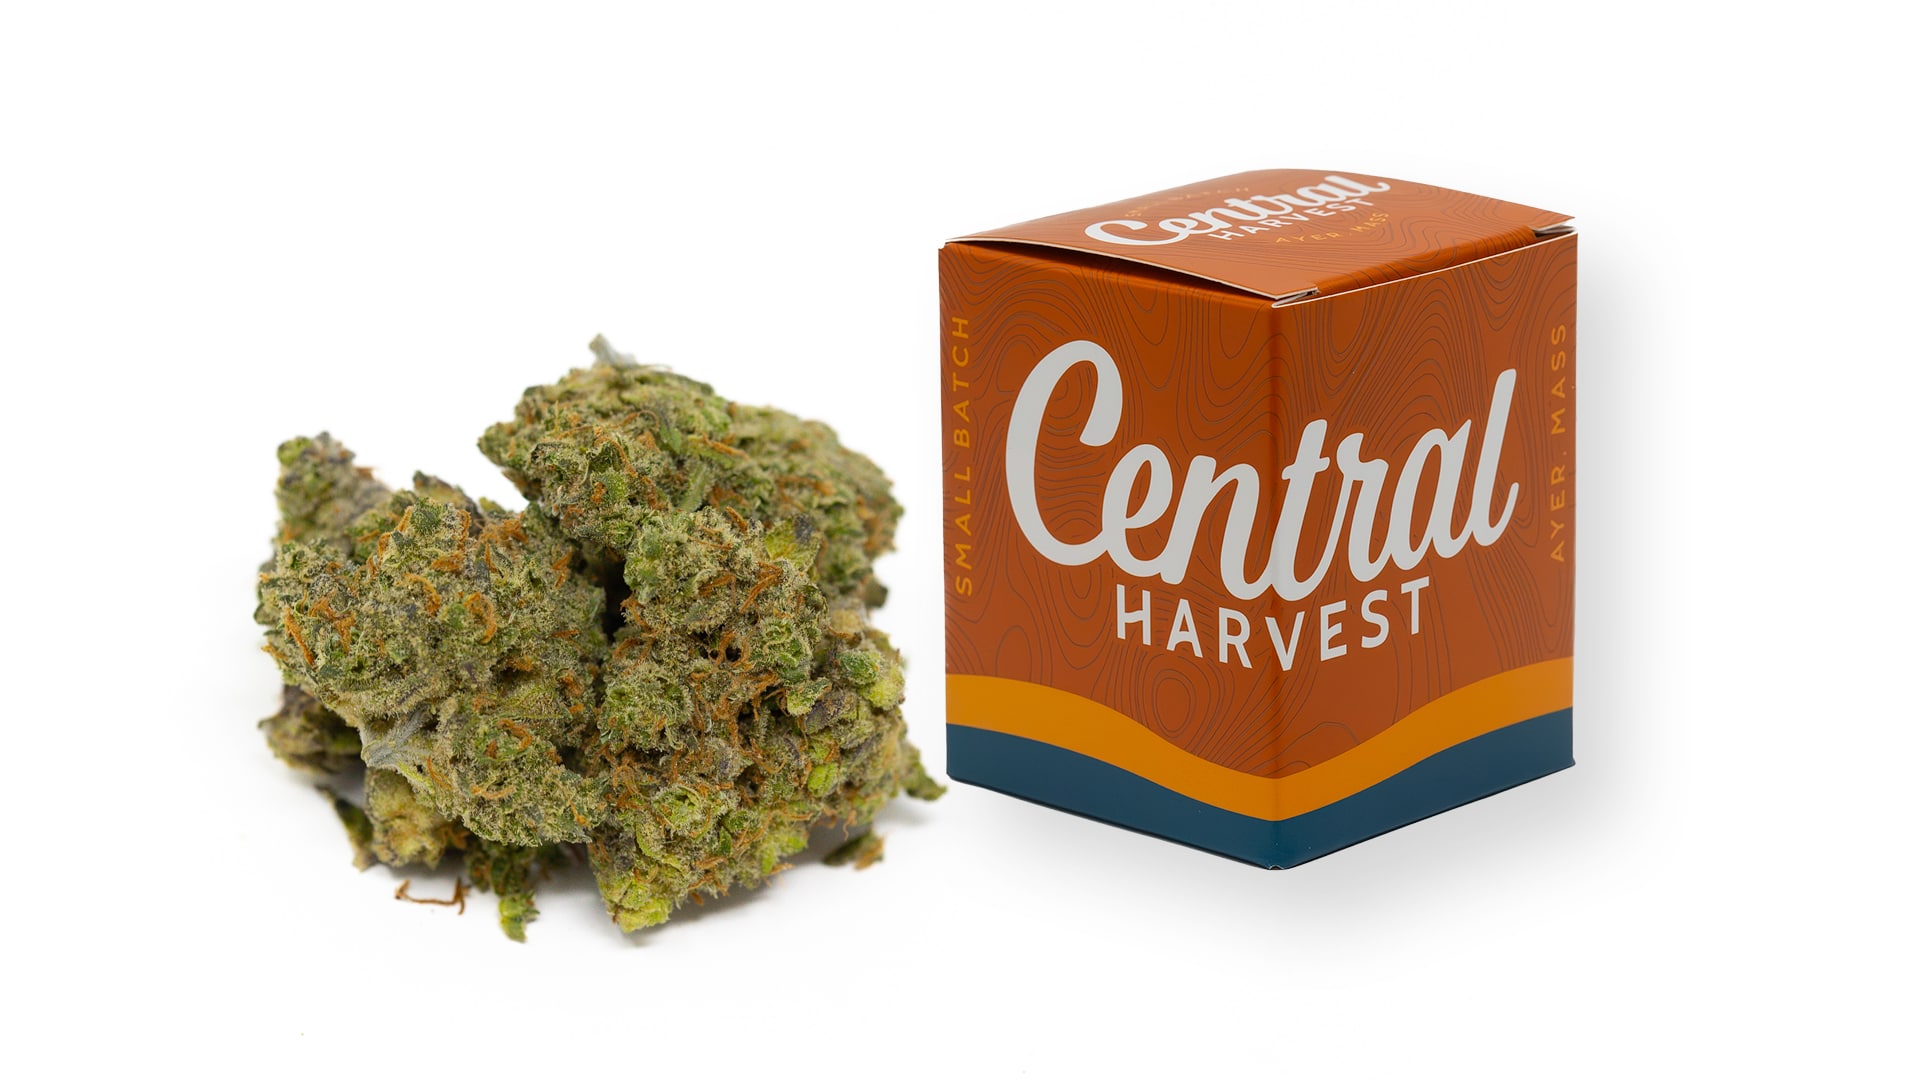 Zkittlez is an Indica Cannabis Strain grown at Central Harvest